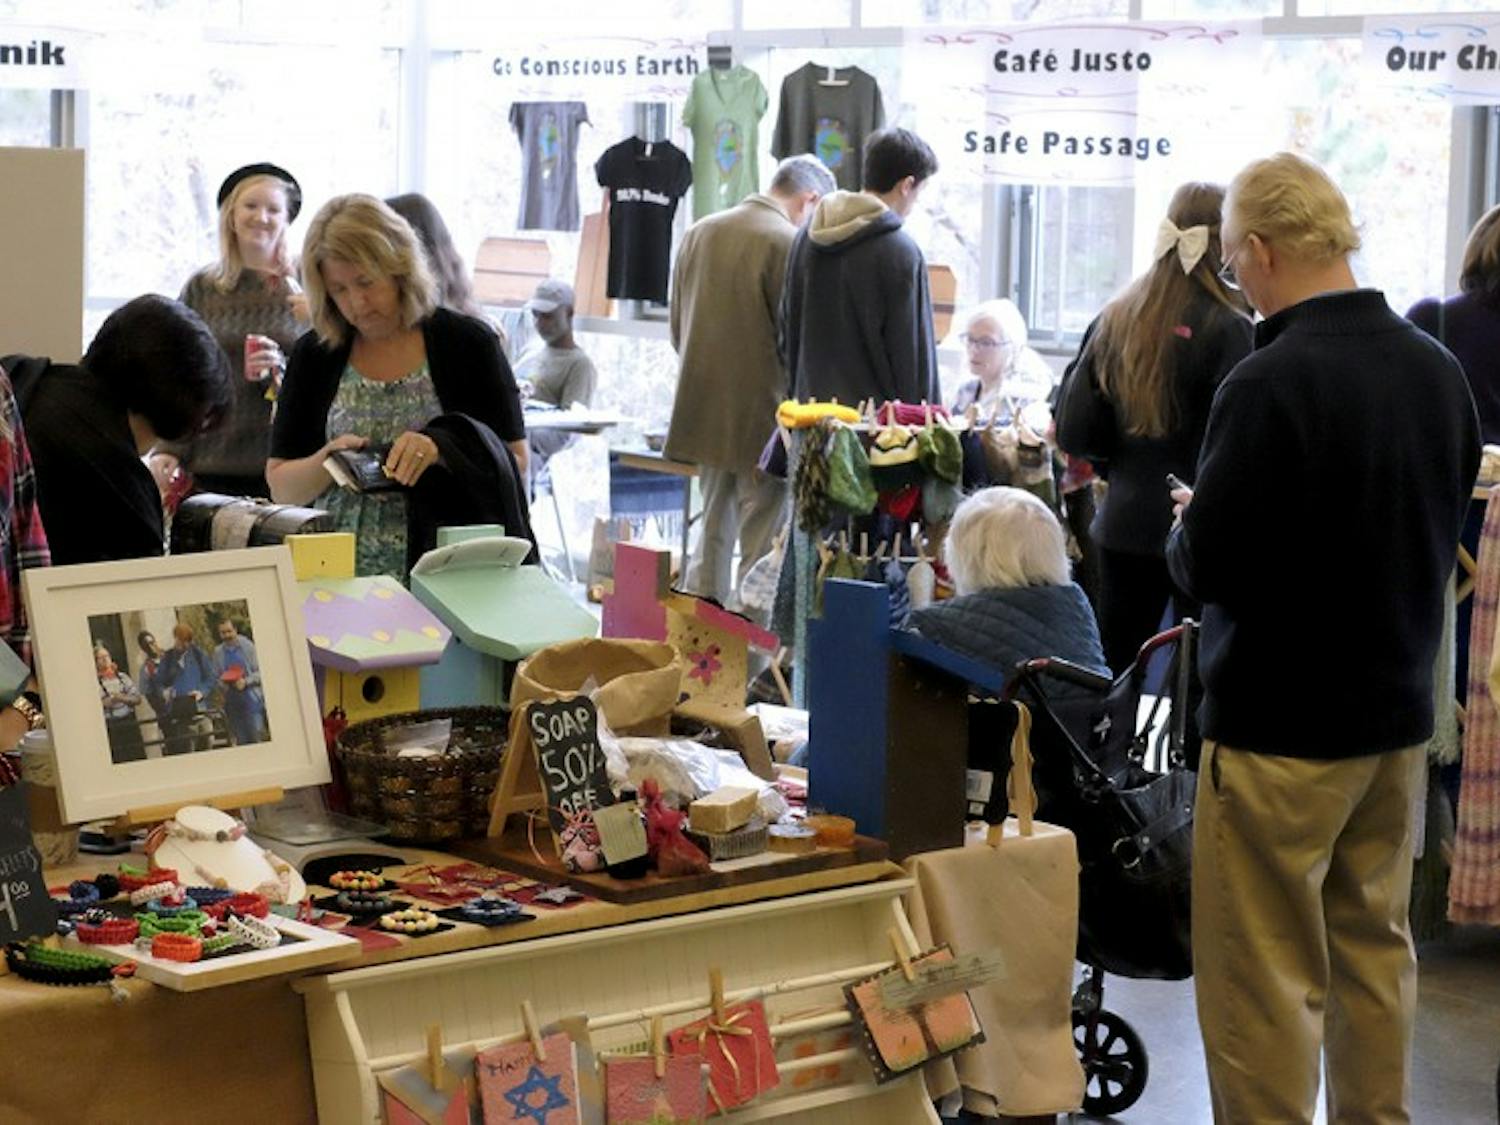 People gather at The United Church of Chapel Hill for the Alternative Market. The market was originally located on Cameron Street.